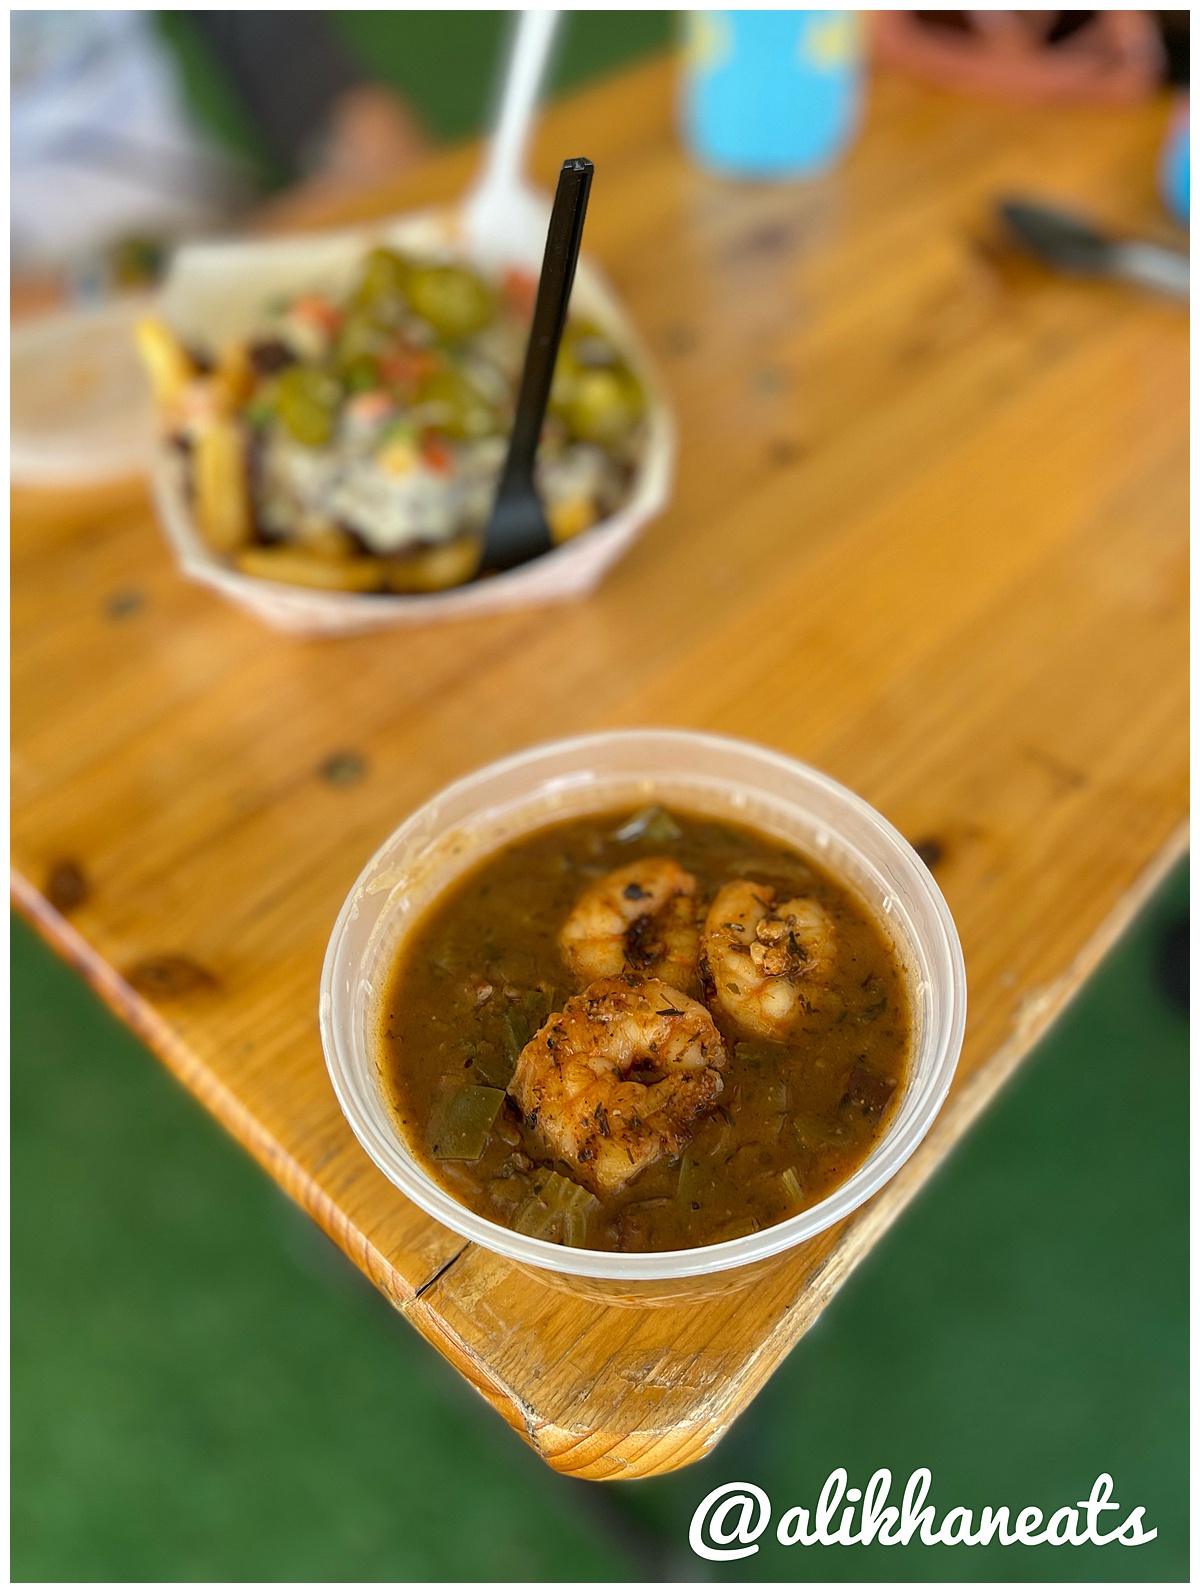 Redfin gumbo ACL Eats